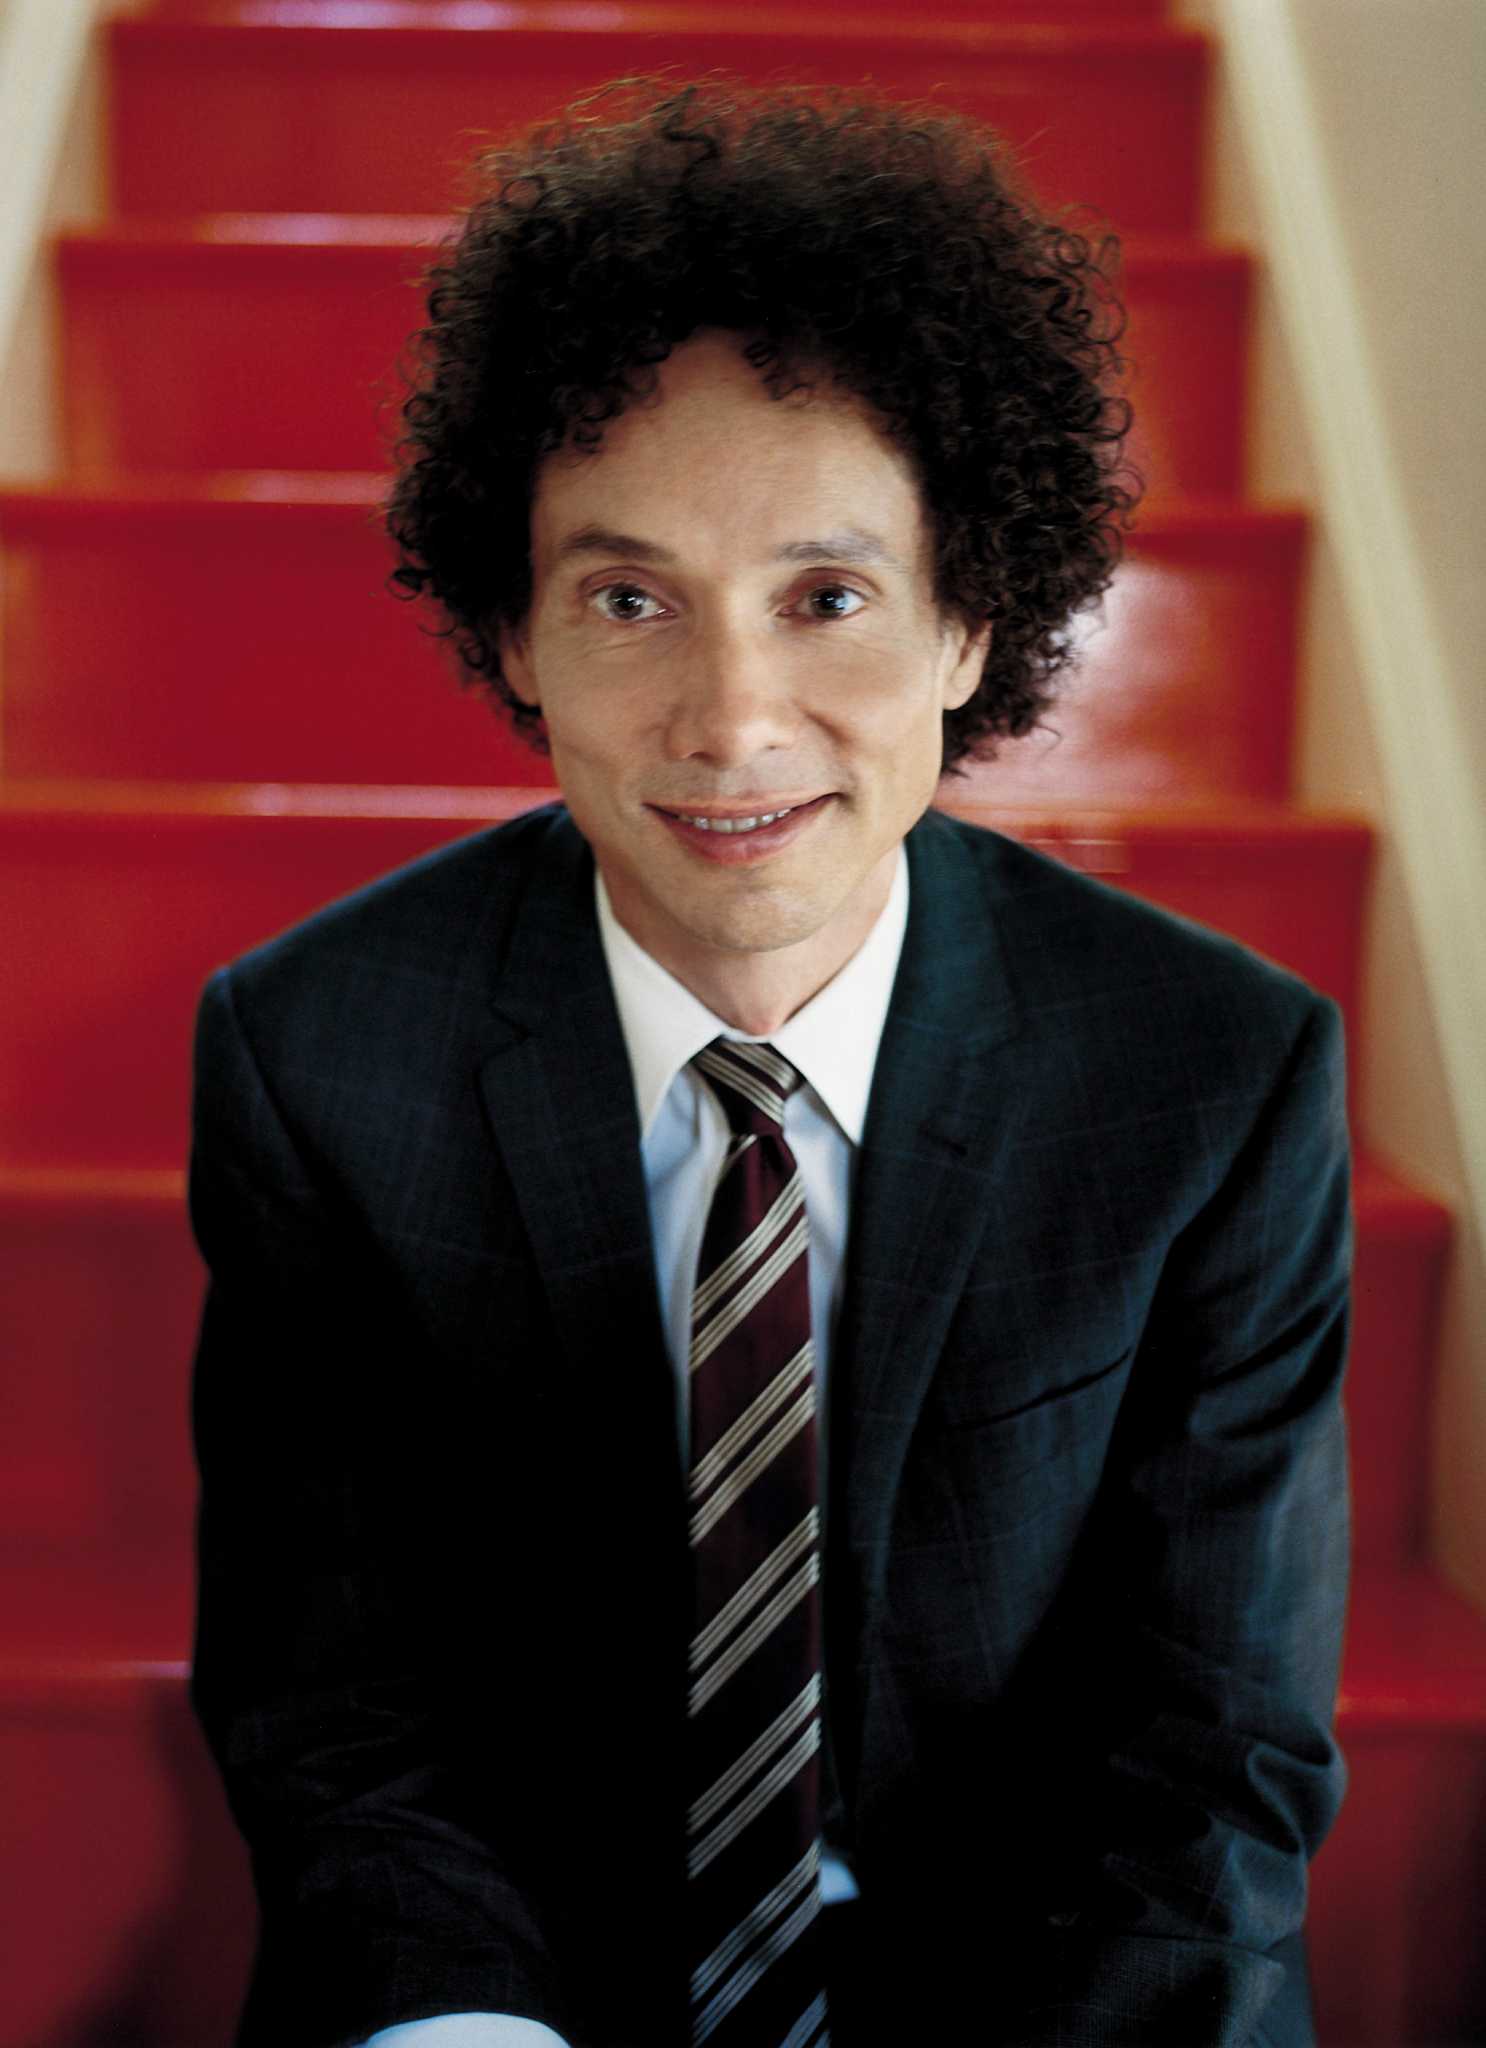 Malcolm Gladwell talk about his return to faith - Houston Chronicle1486 x 2048